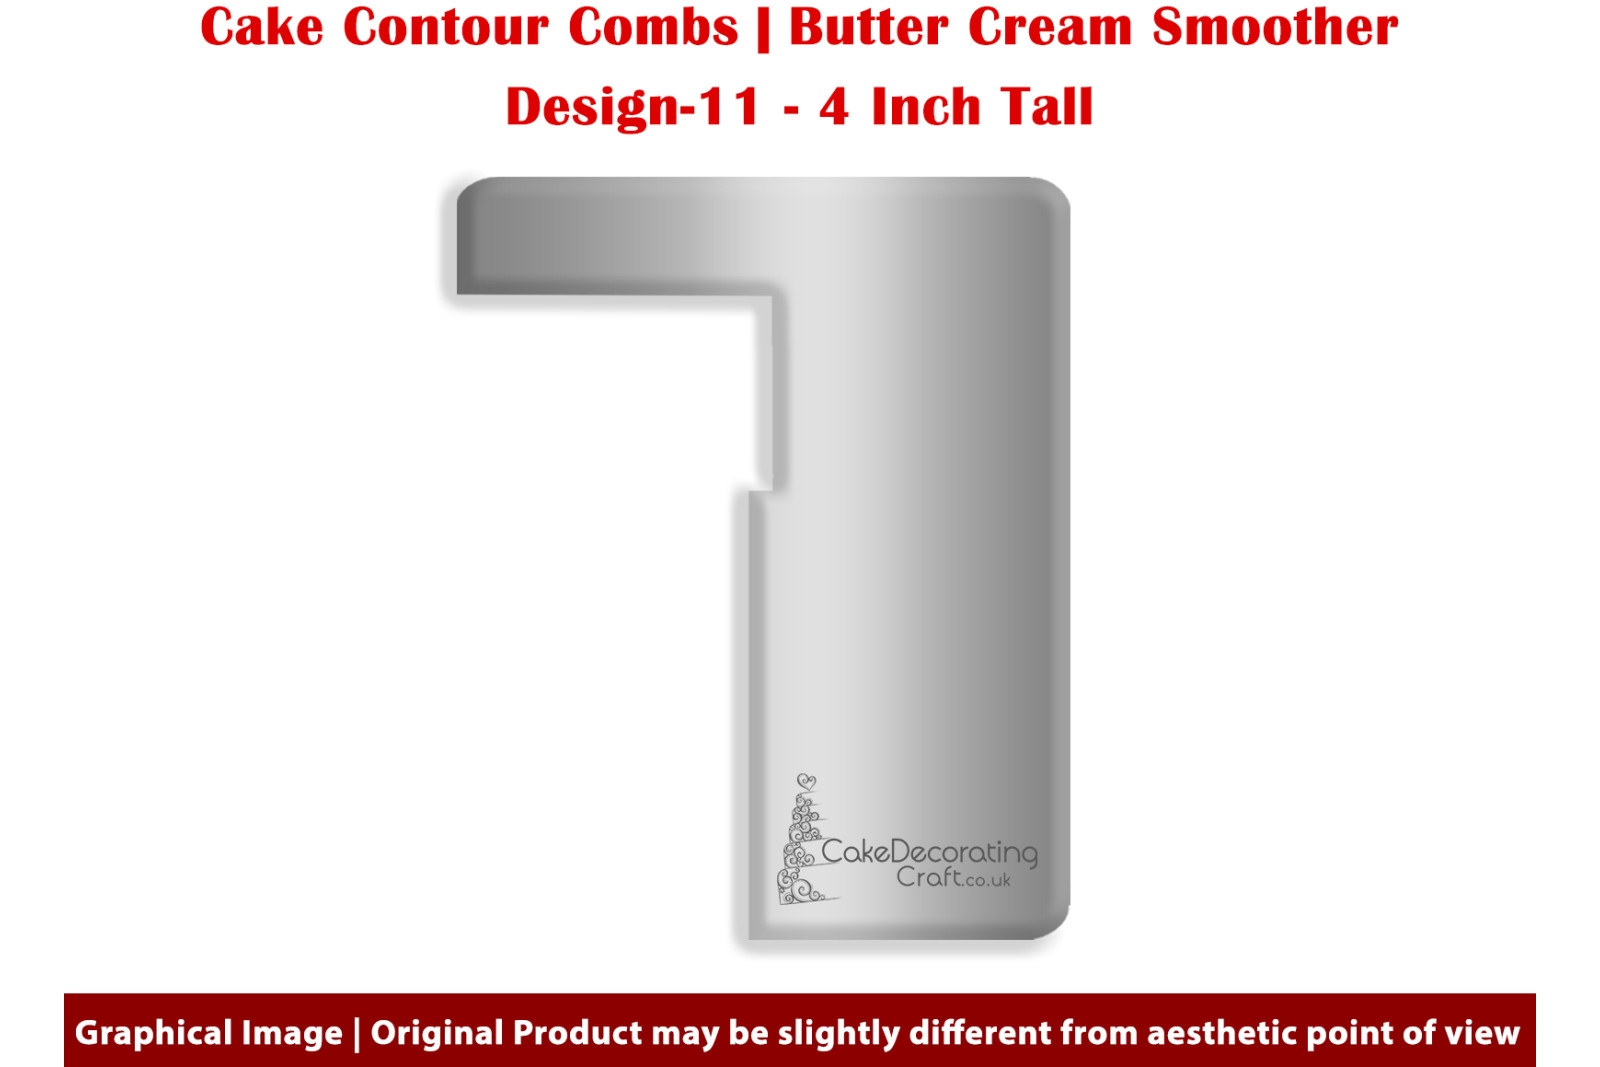 Gift Box | 4 Inch | Cake Decorating Craft | Cake Contour Combs | Smoothing | Metal Spreader | Butter Cream Smoothing | Genius Tool